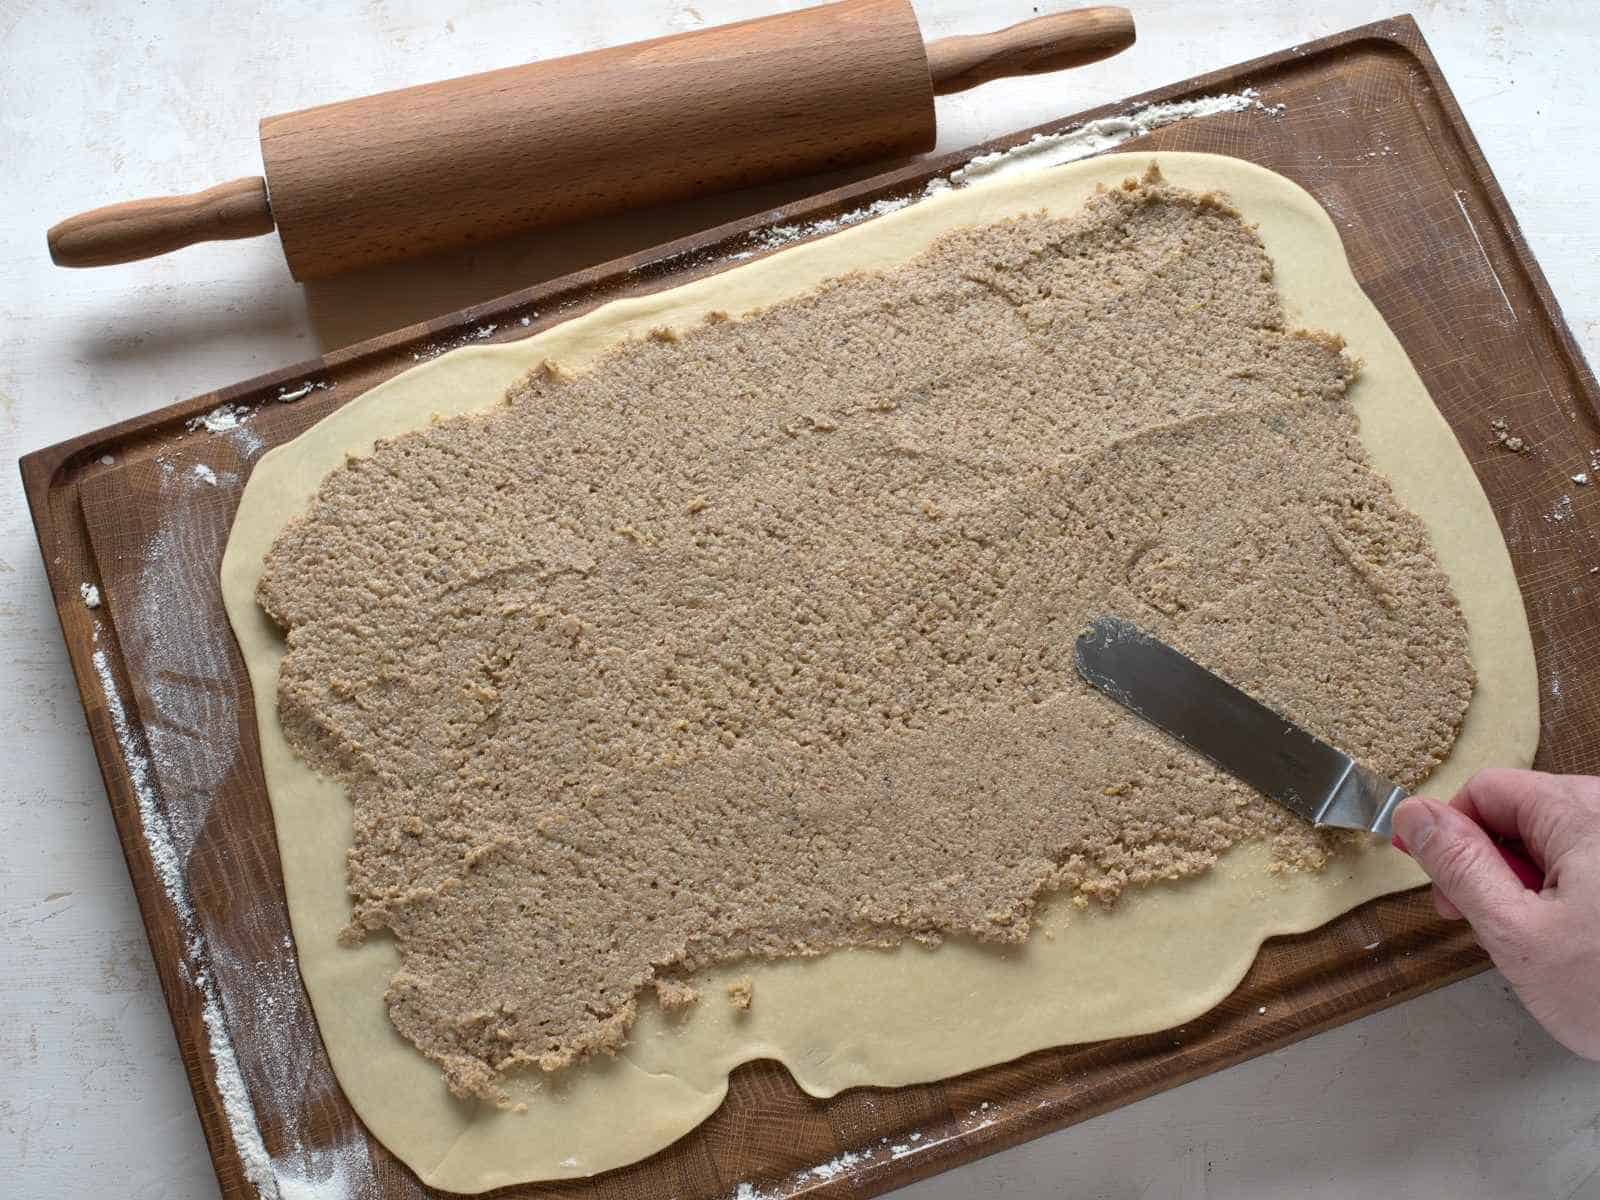 Spreading walnut filling over rolled dough.